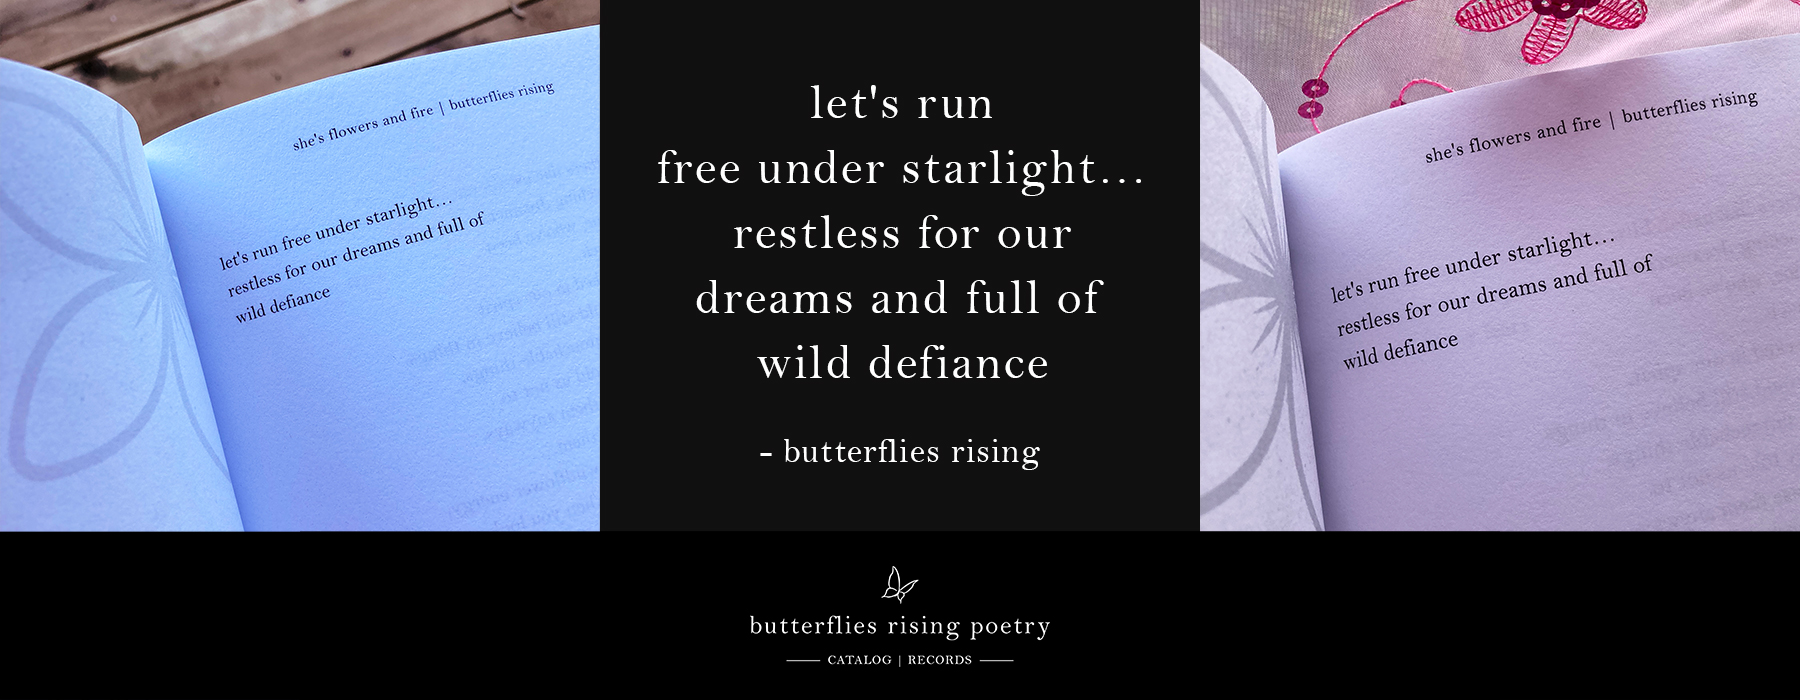 let's run free under starlight... restless for our dreams and full of wild defiance - butterflies rising